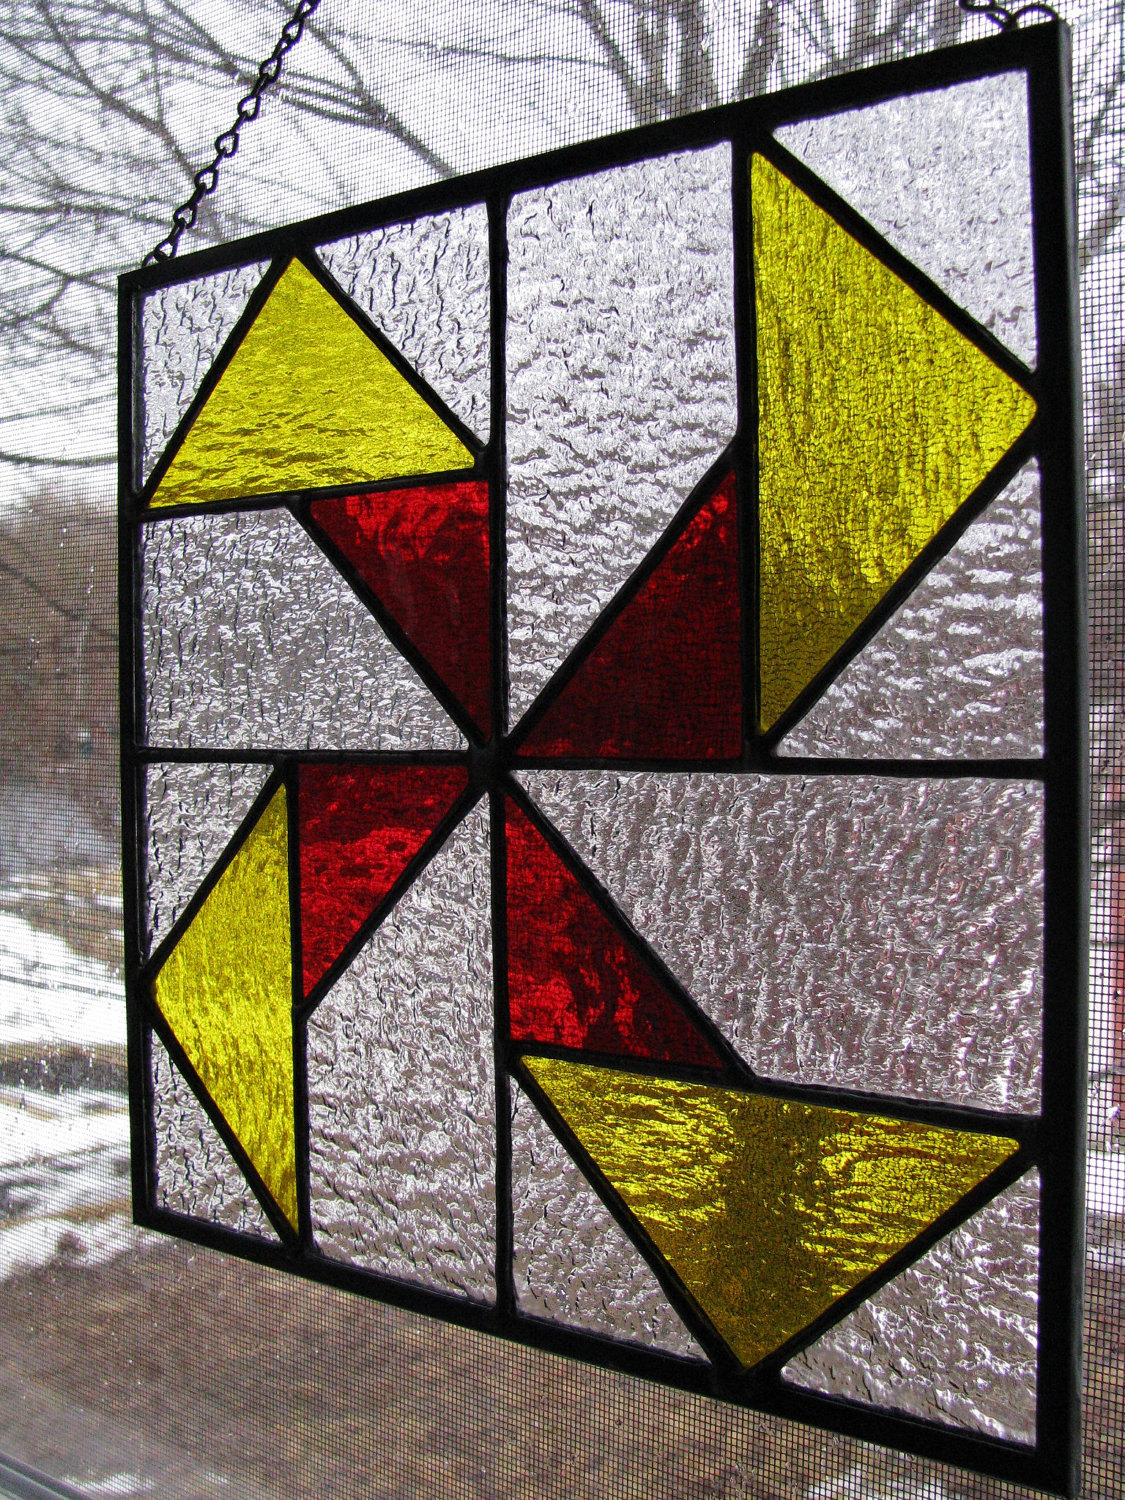 stained glass pattern maker app